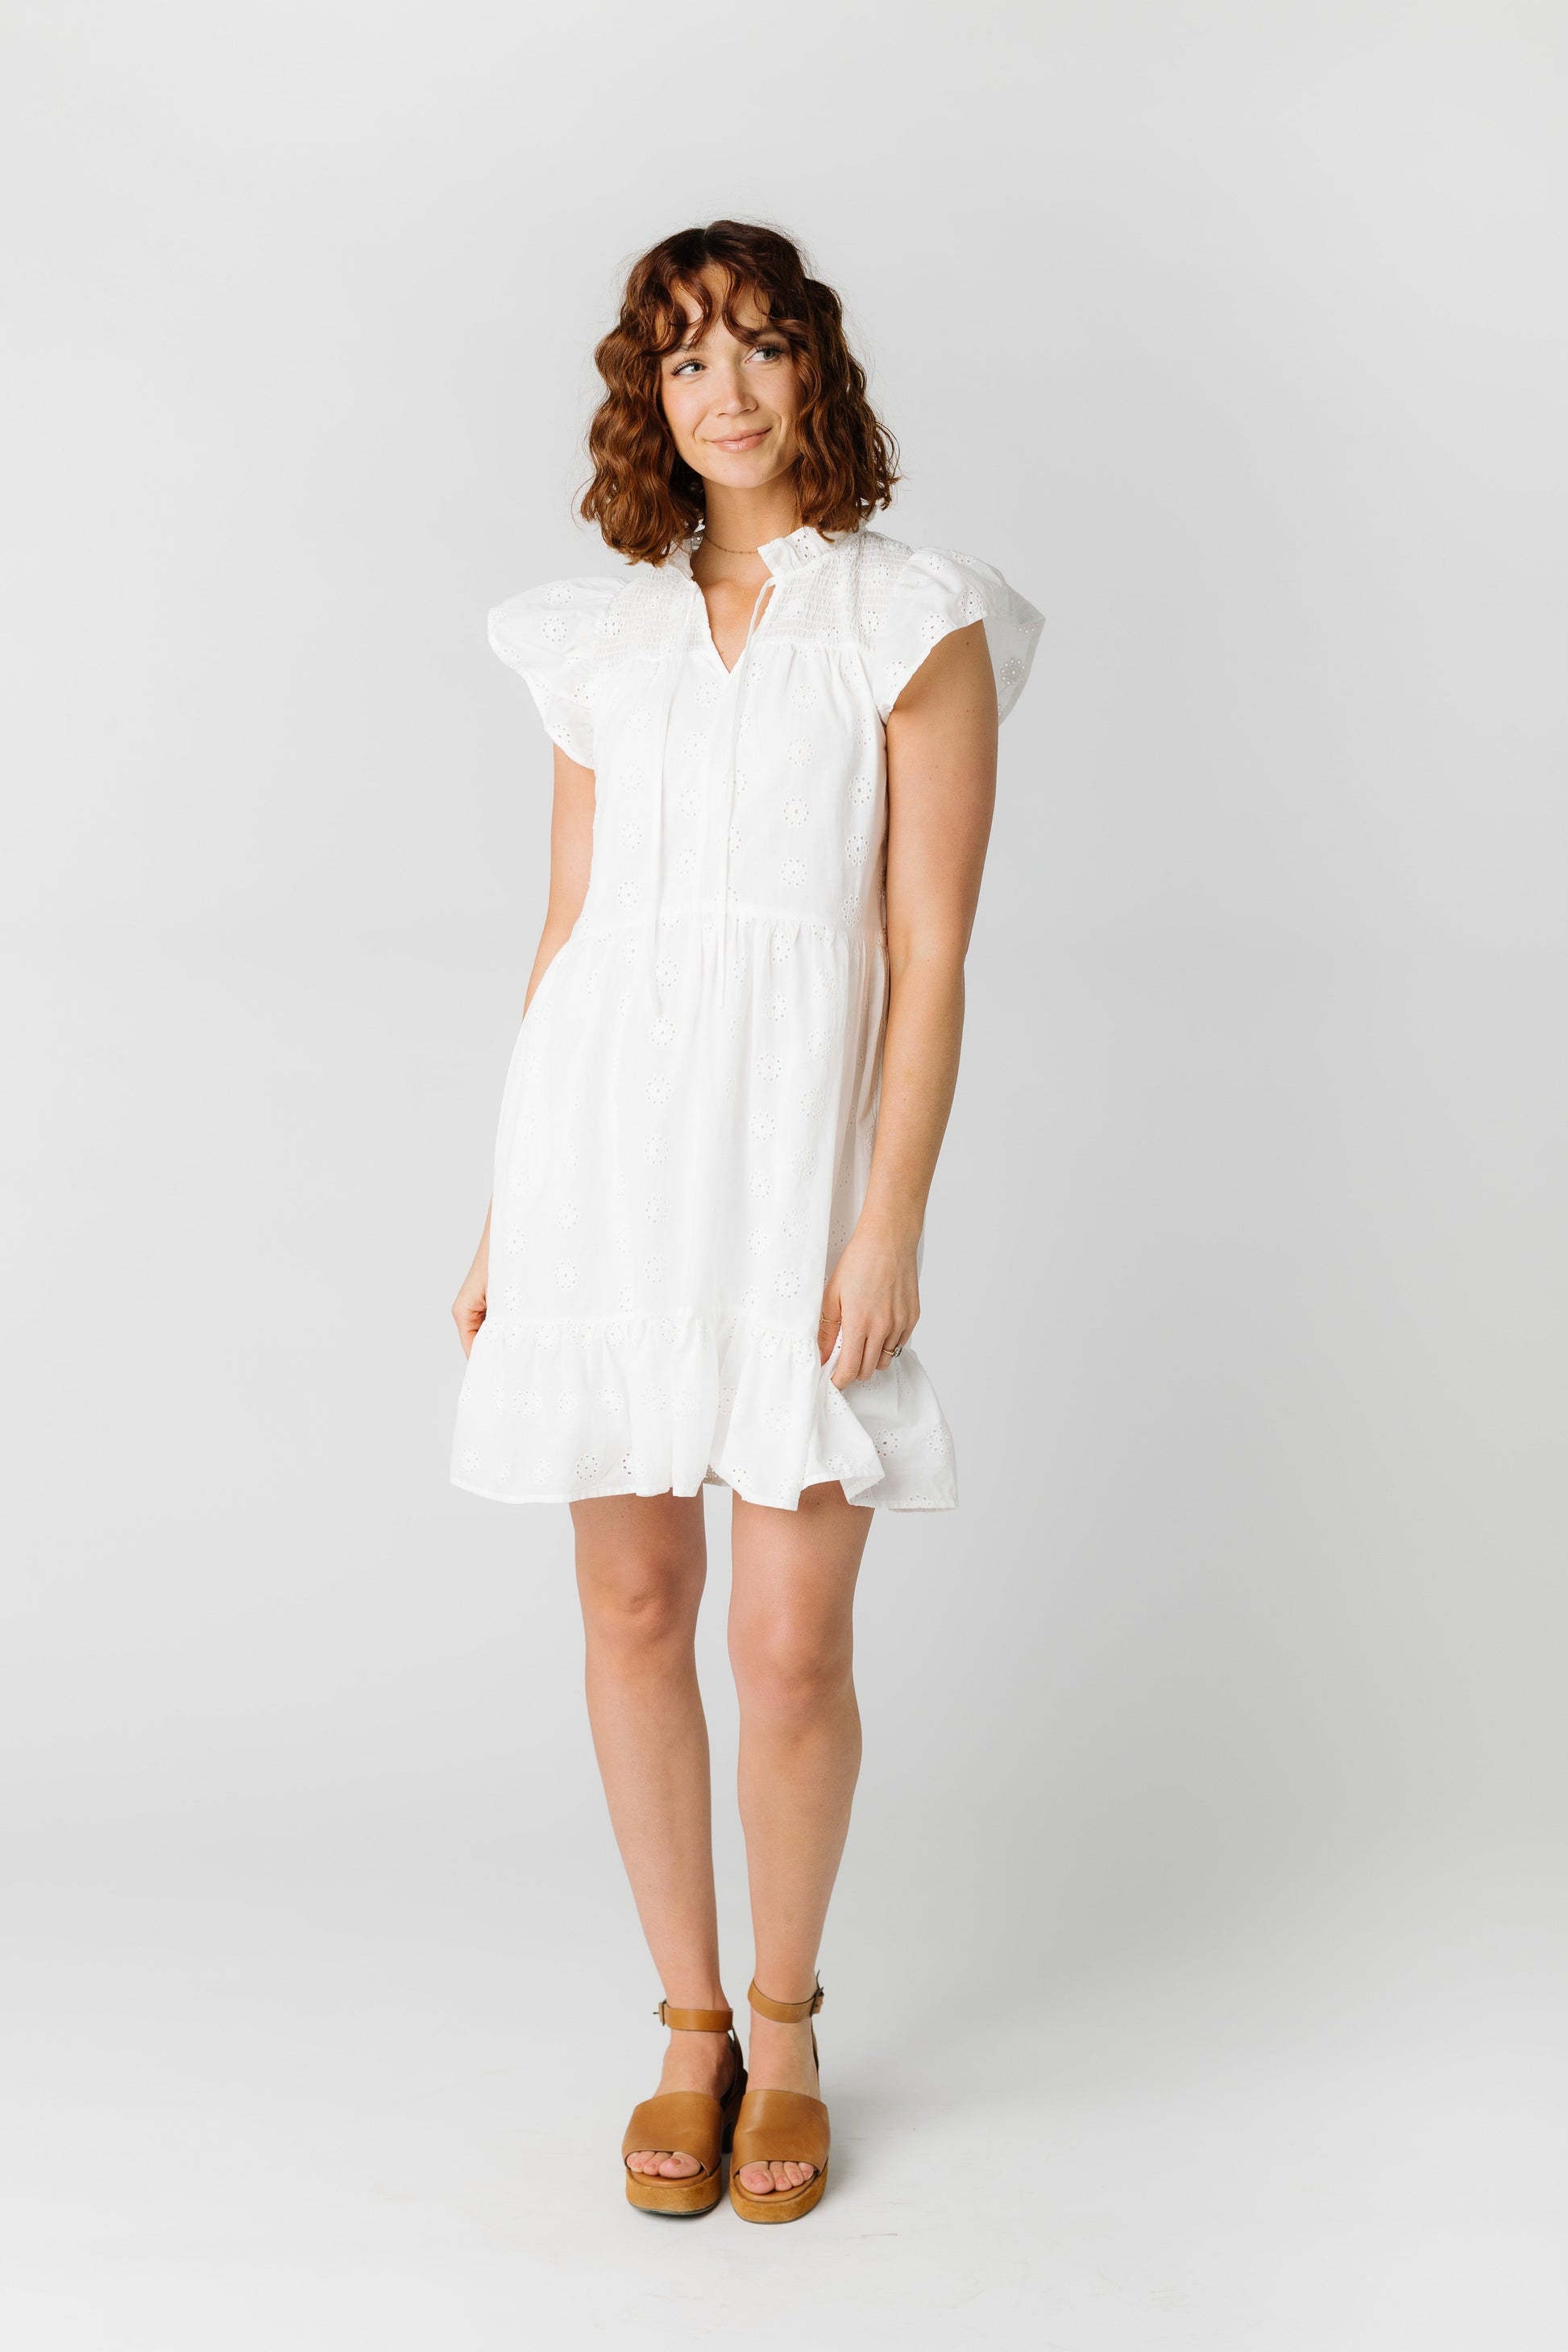 Brass & Roe Darling Eyelet Dress – Called to Surf